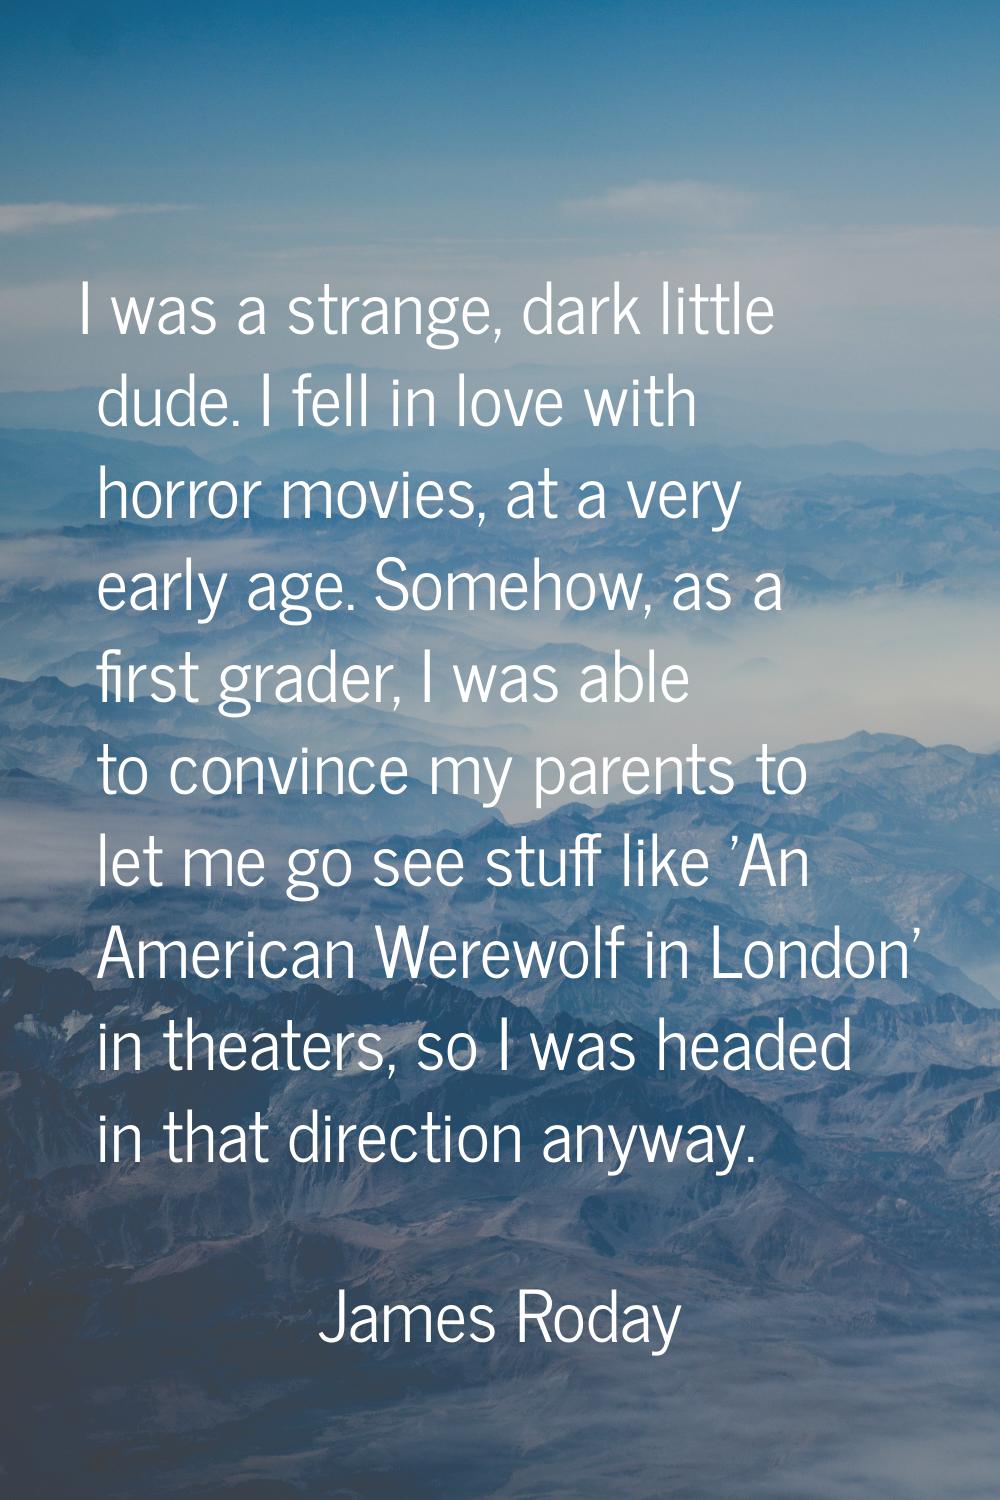 I was a strange, dark little dude. I fell in love with horror movies, at a very early age. Somehow,